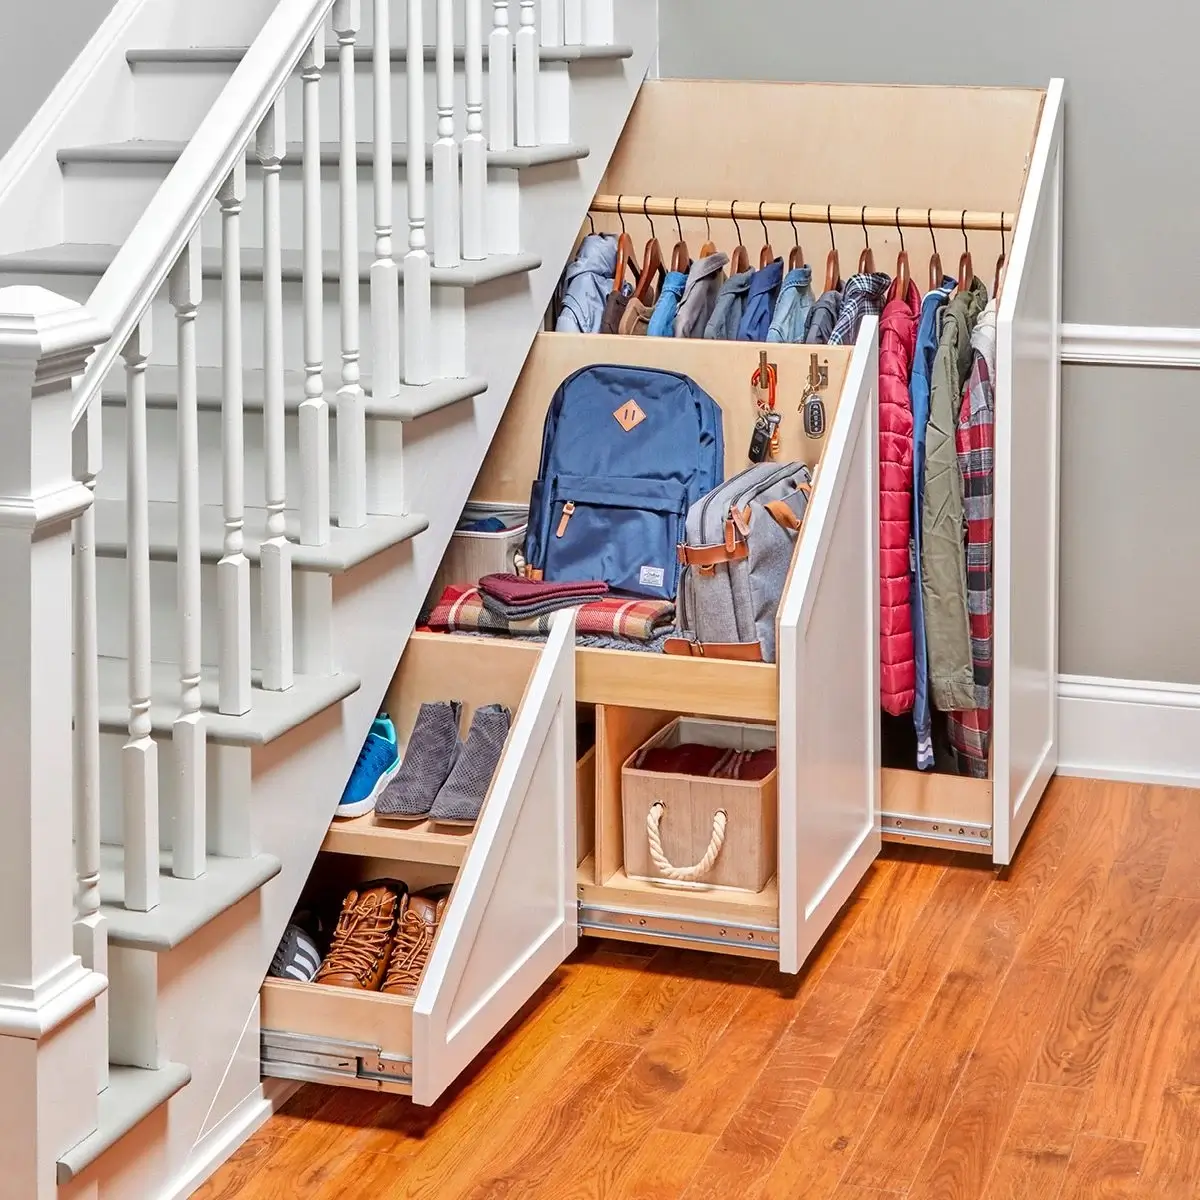 20 Under The Stair Ideas You'll Love - 141